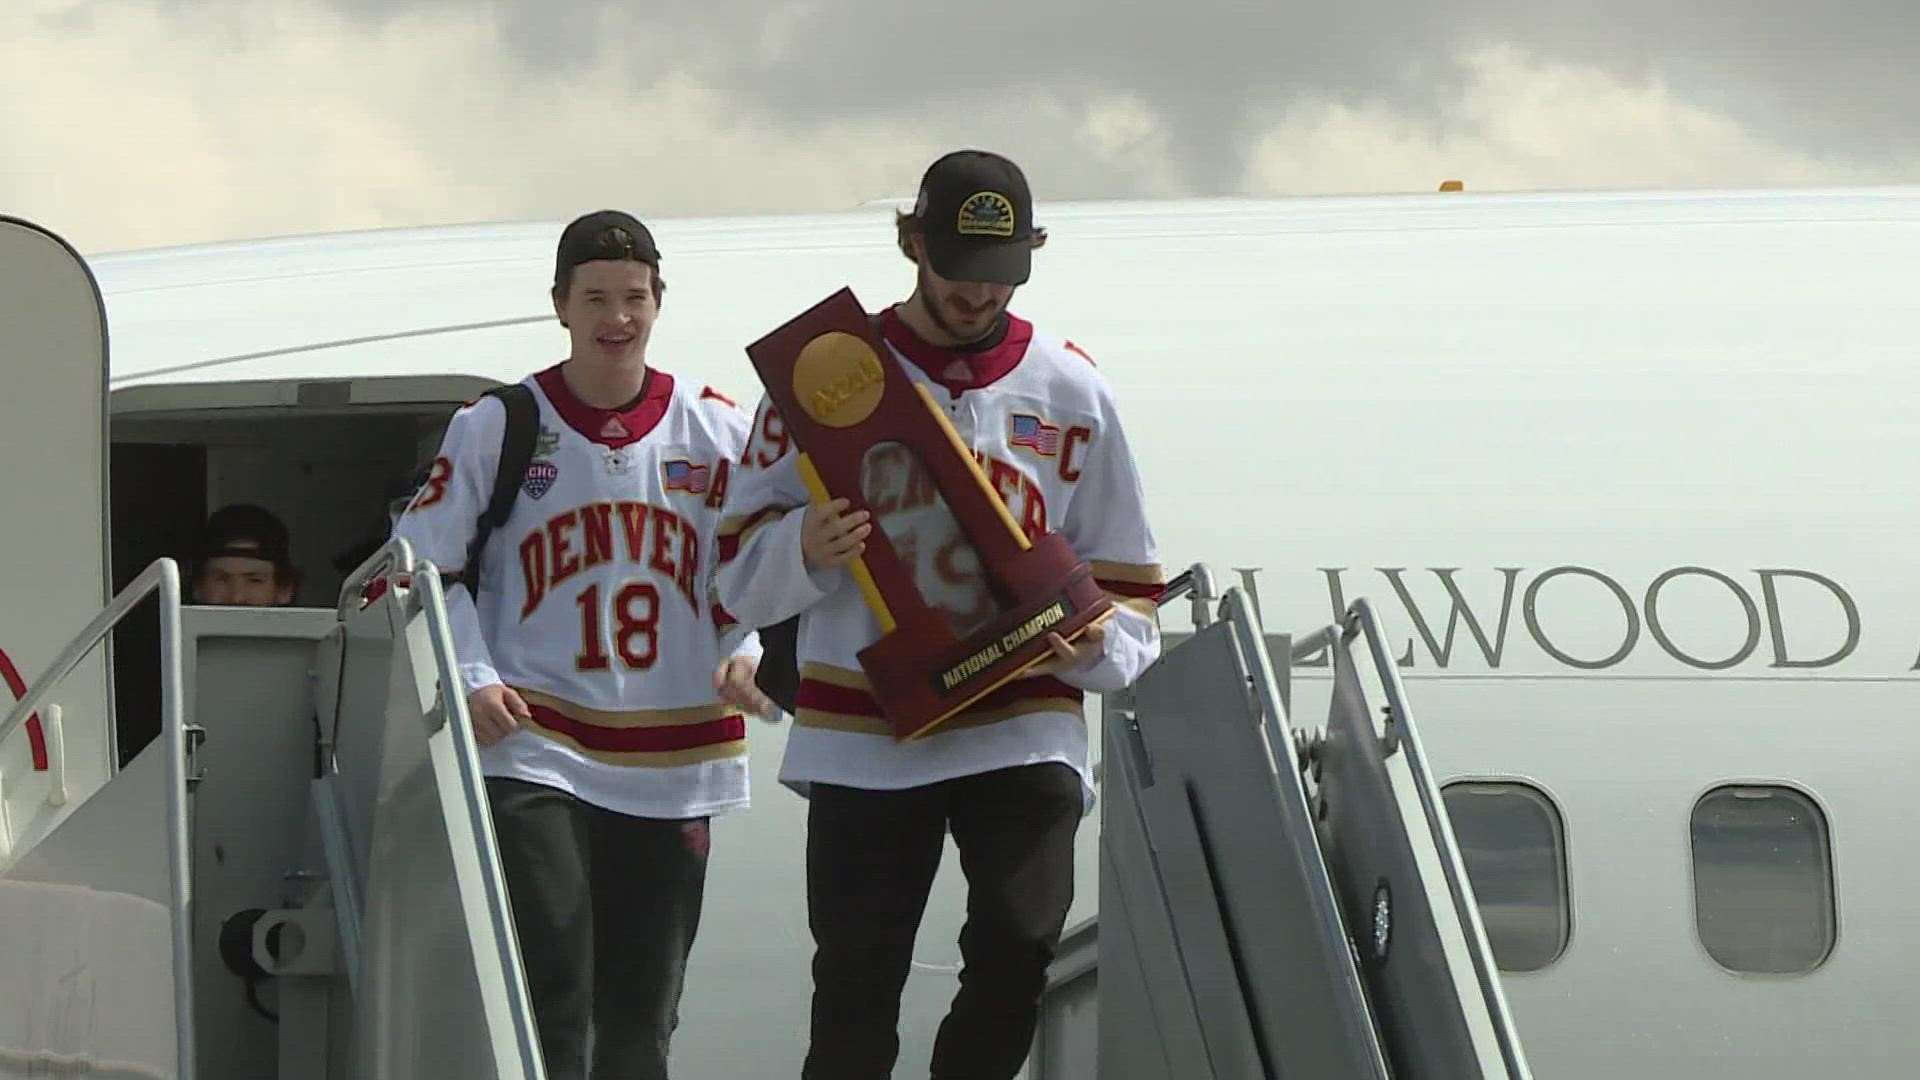 The Pioneers flew back to Denver on Sunday after winning the NCAA hockey national championship game in Boston the night prior.